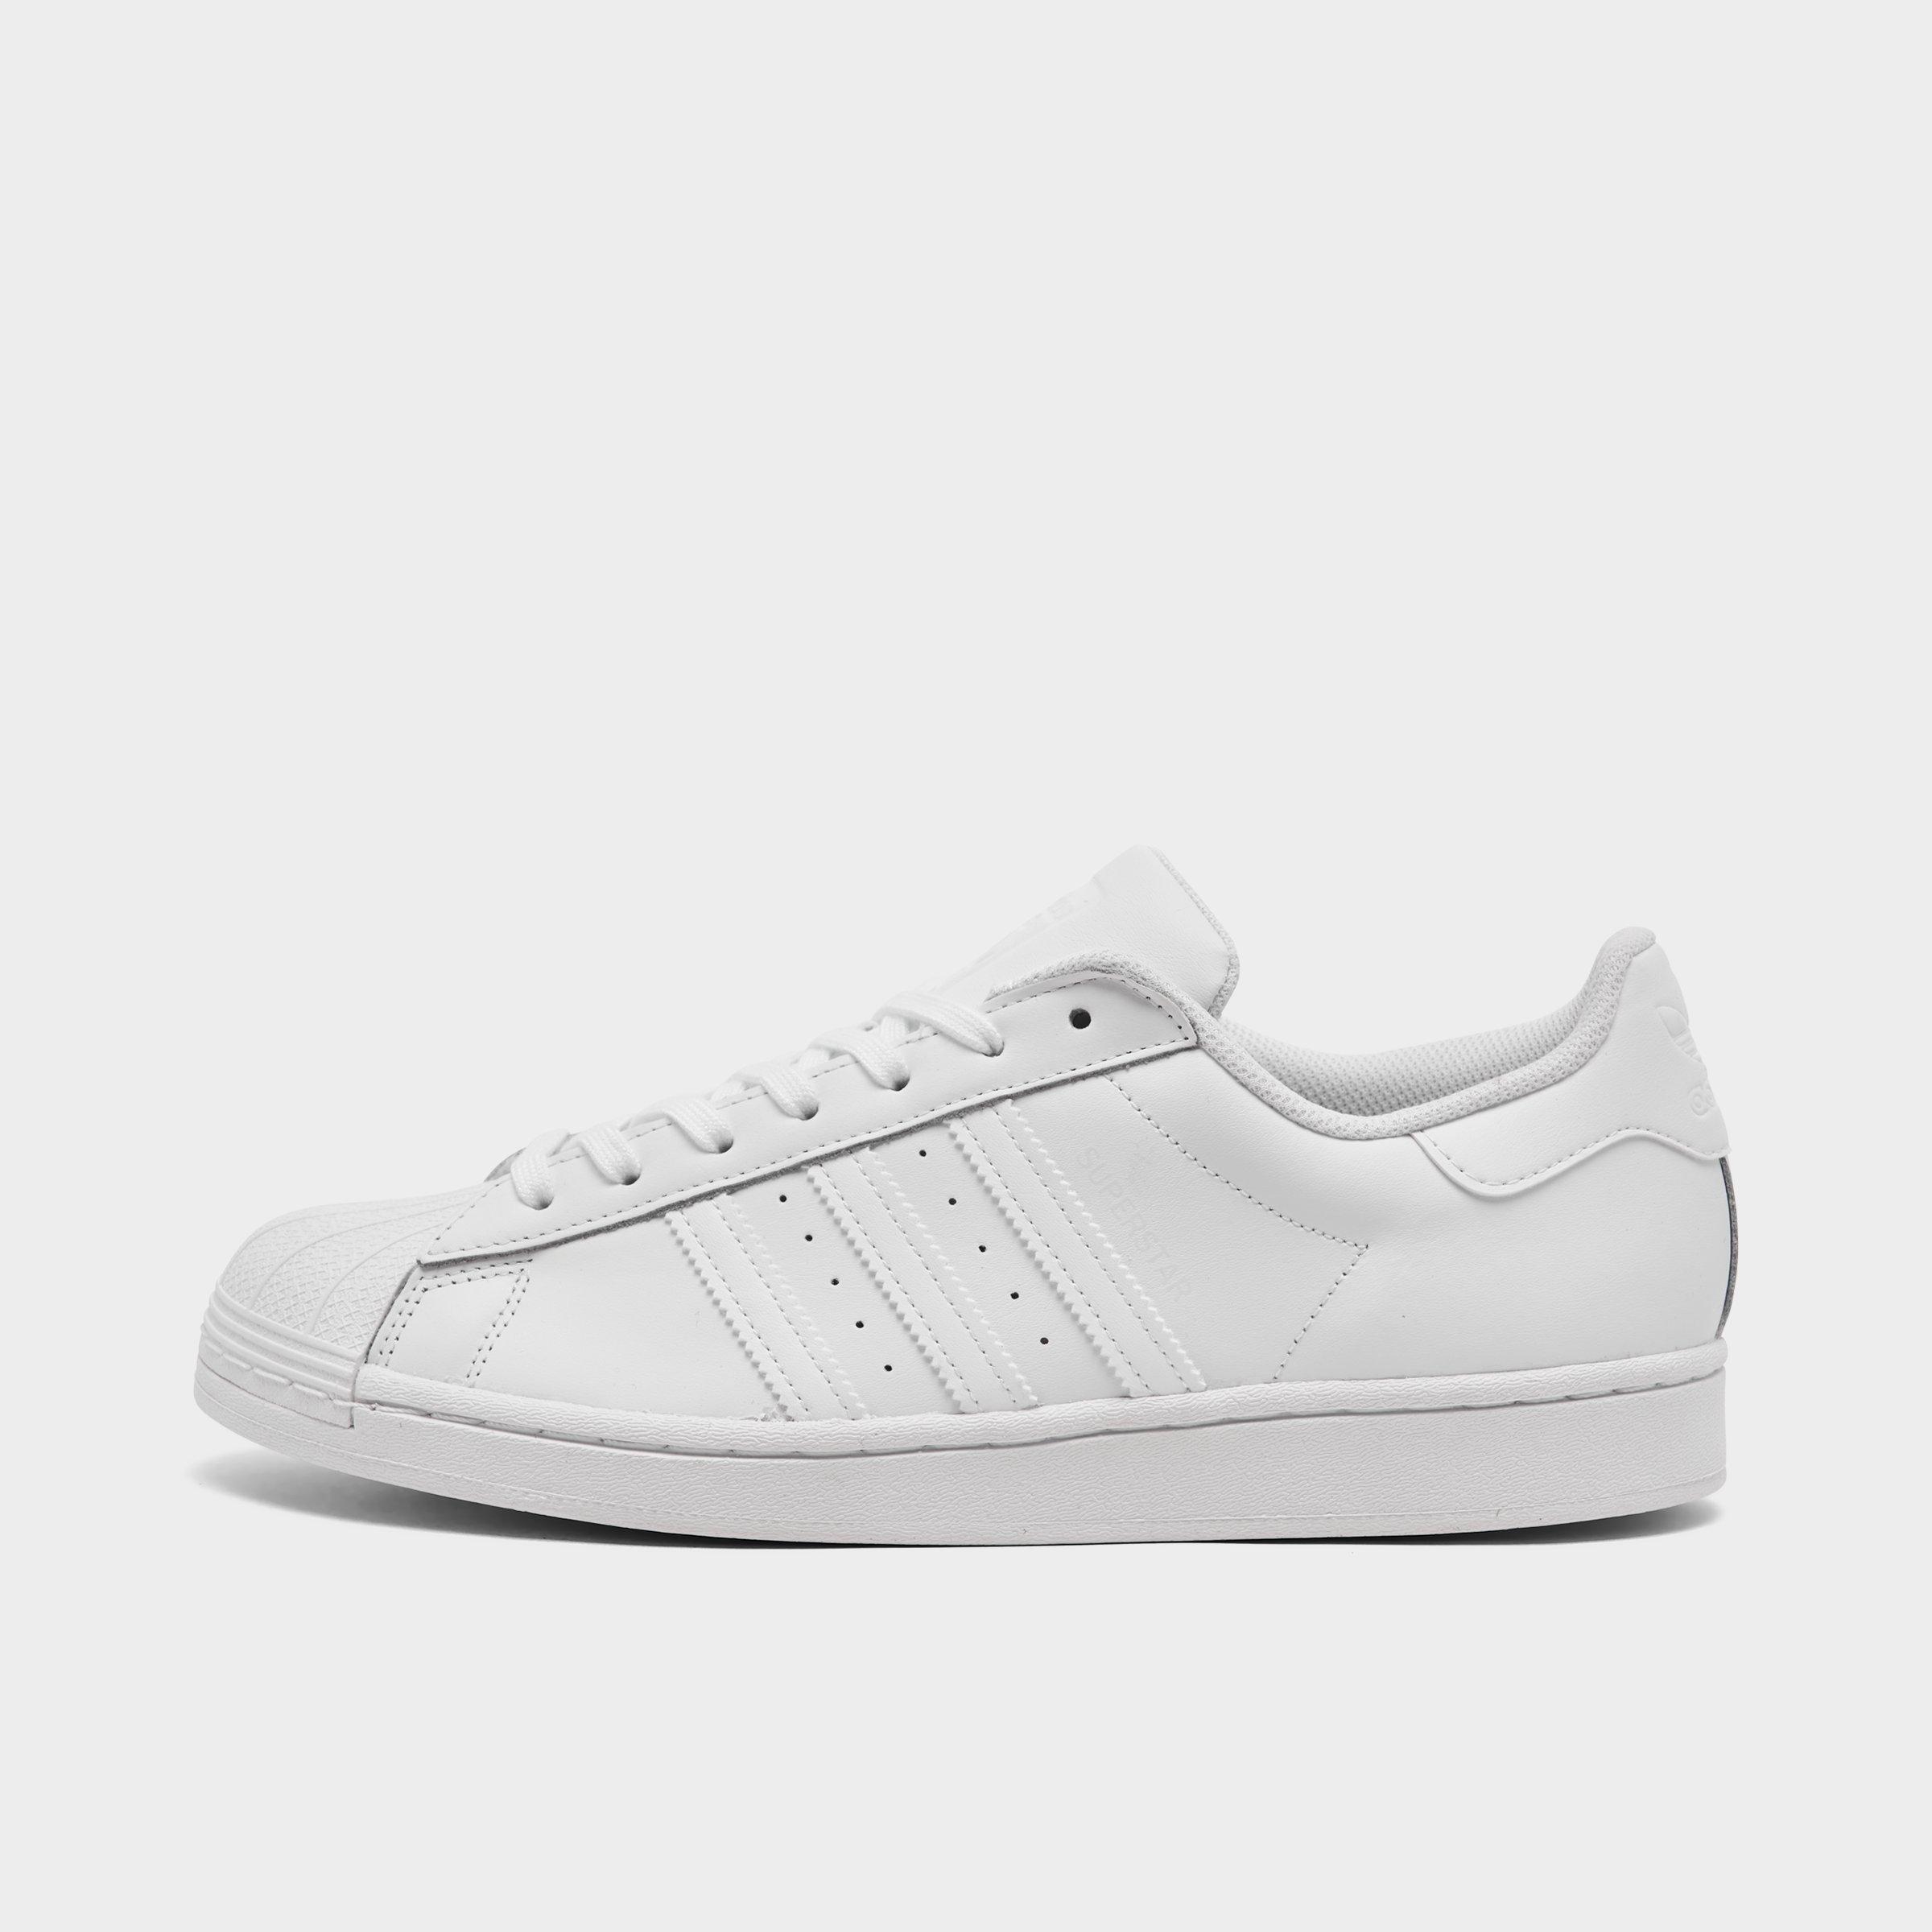 adidas superstar shoes for sale